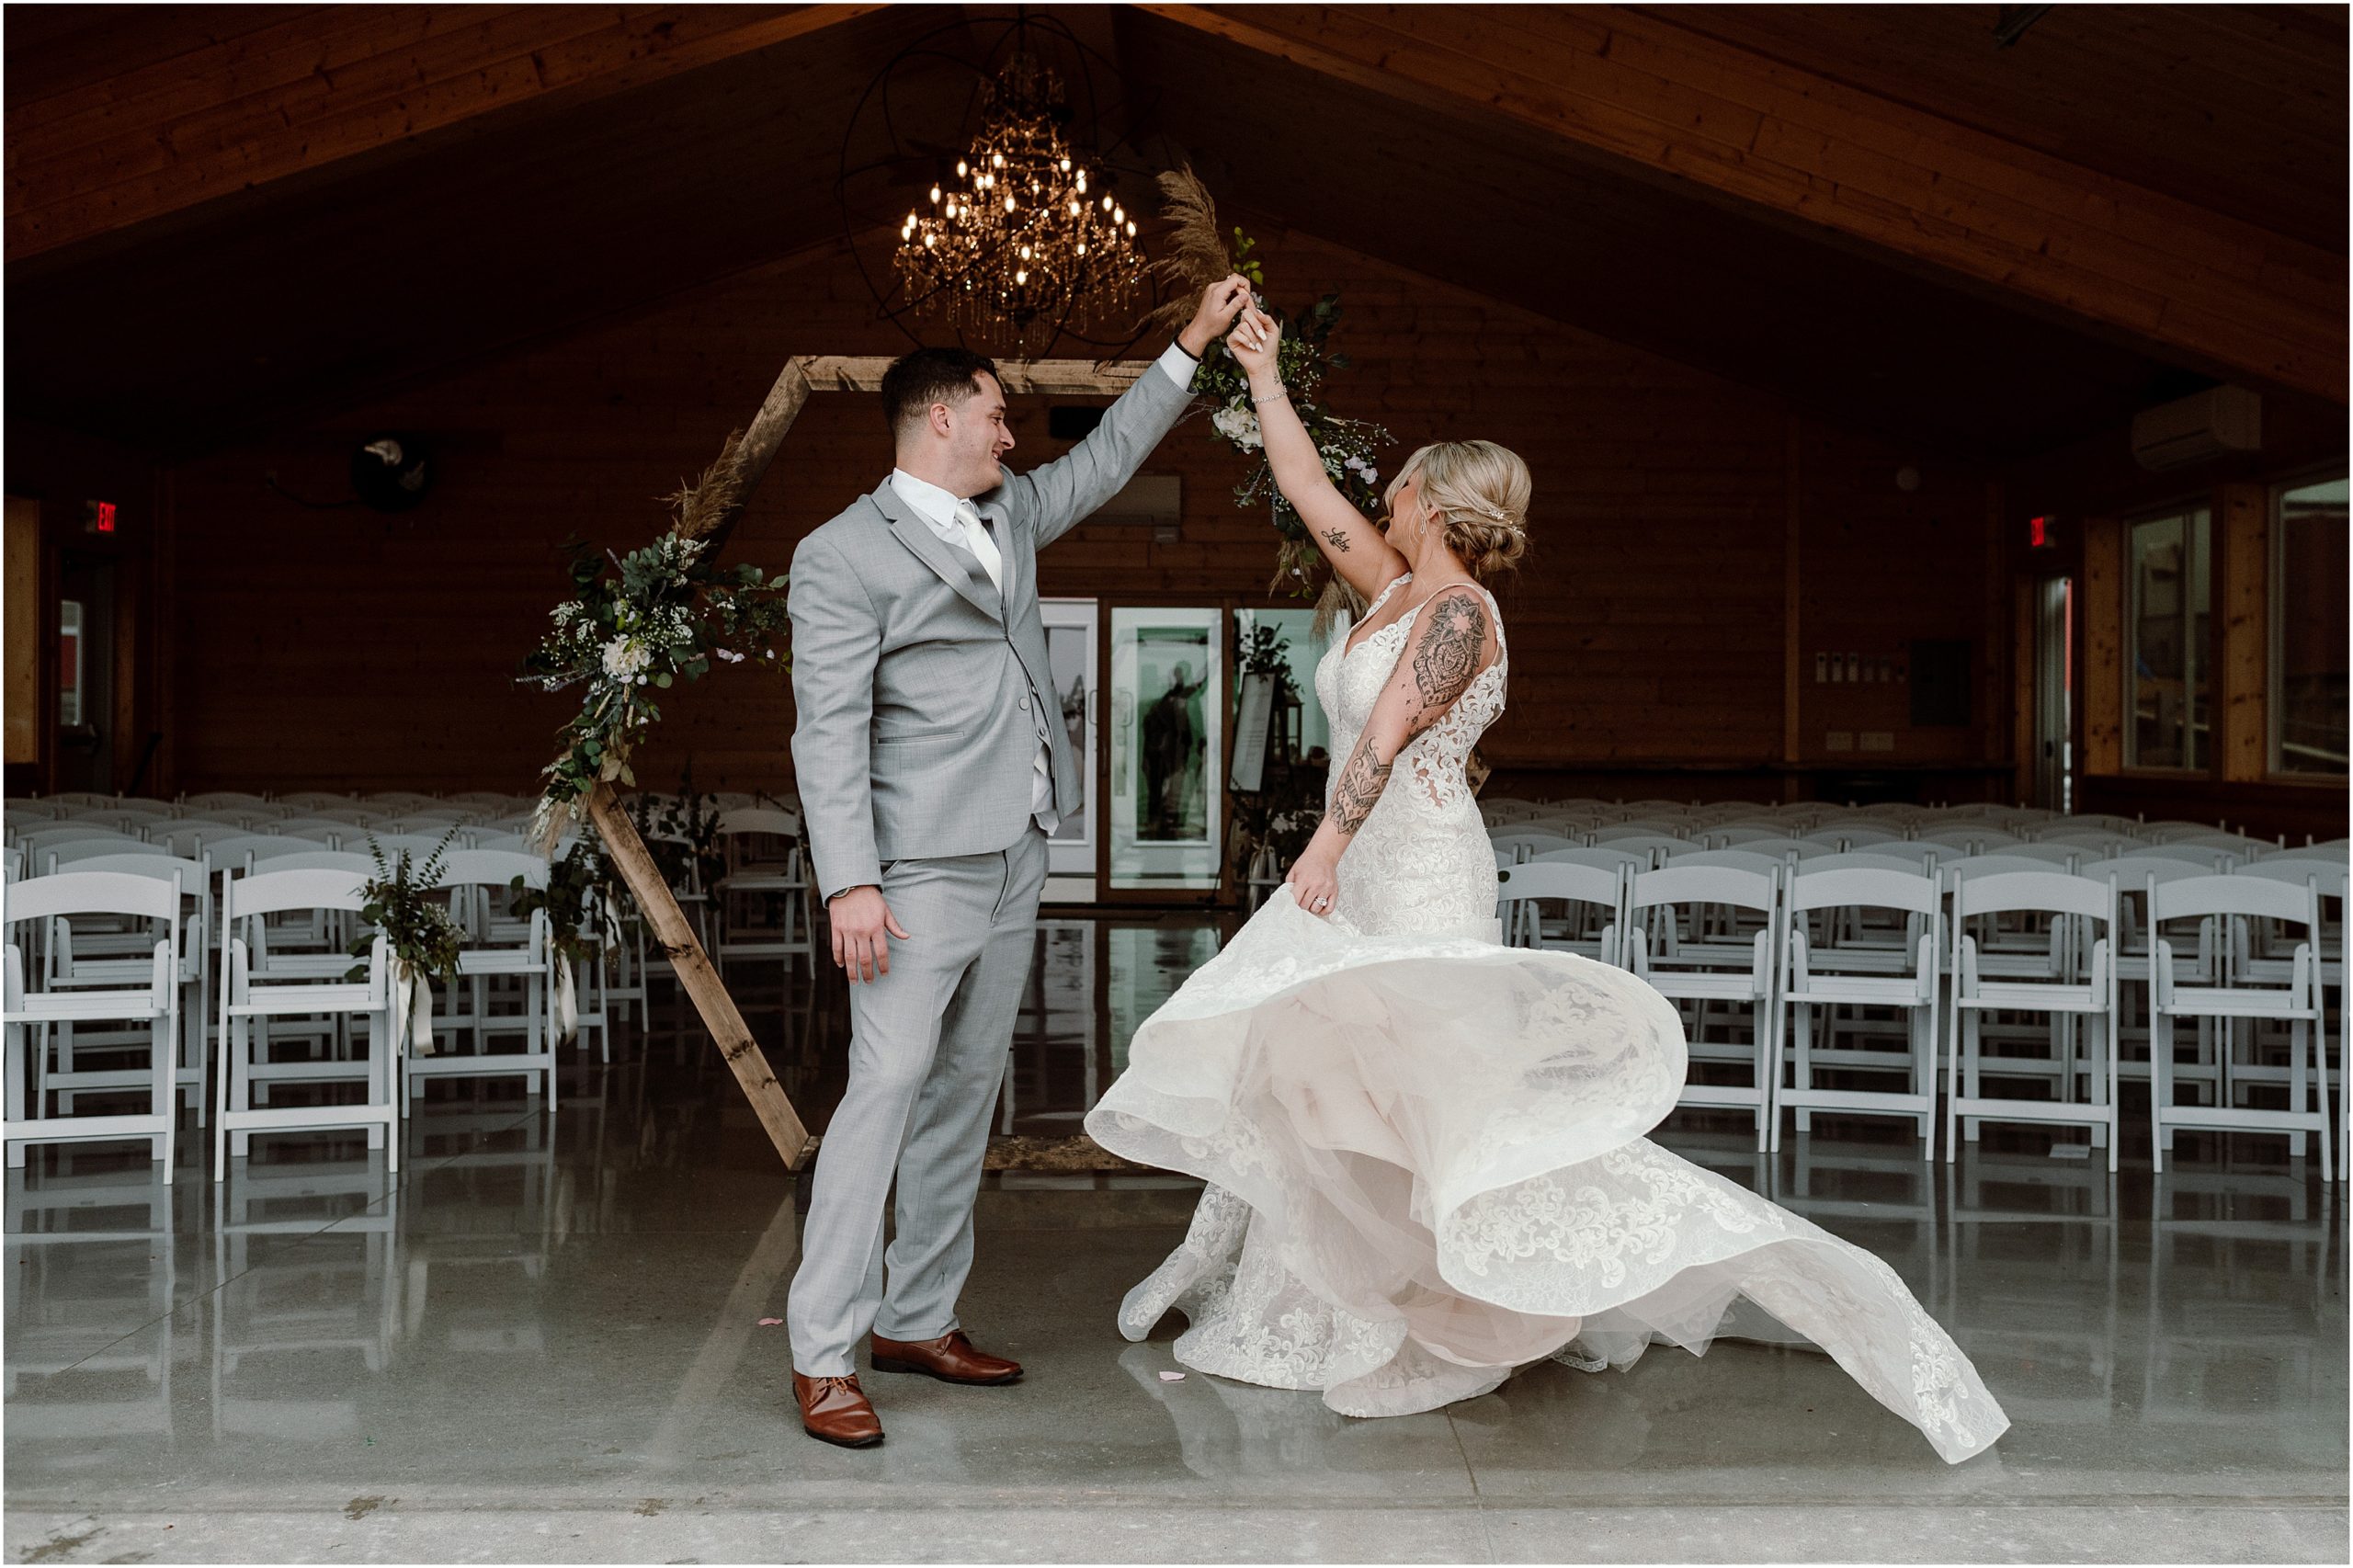 Bride and Groom dance and spin in front of Sparks Barn, an Omaha NE wedding Venue. Photo taken by Nebraska wedding photographer, Anna Brace.